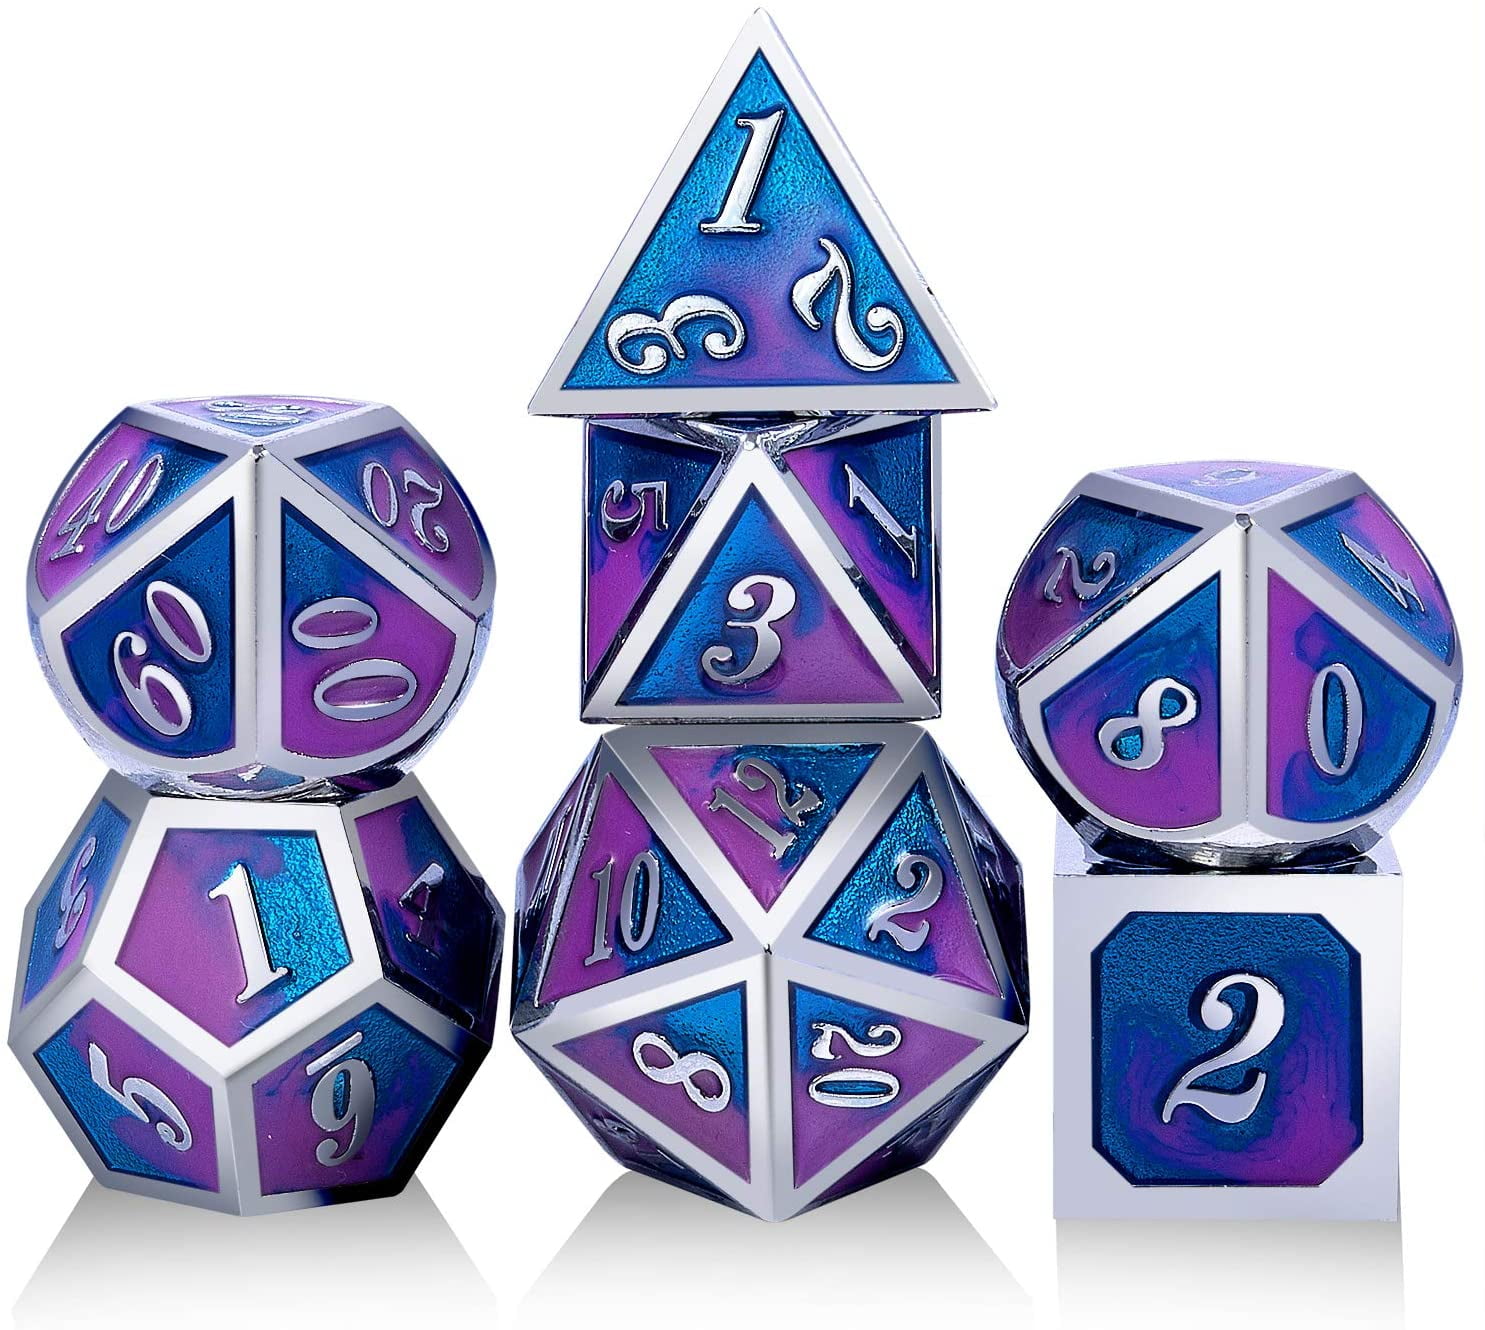 7 Die Enamel Polyhedral DND Dice Set with Metal Tin for Dungeons and Dragons and Role Playing Game Purple Metal Dice Set D&D 